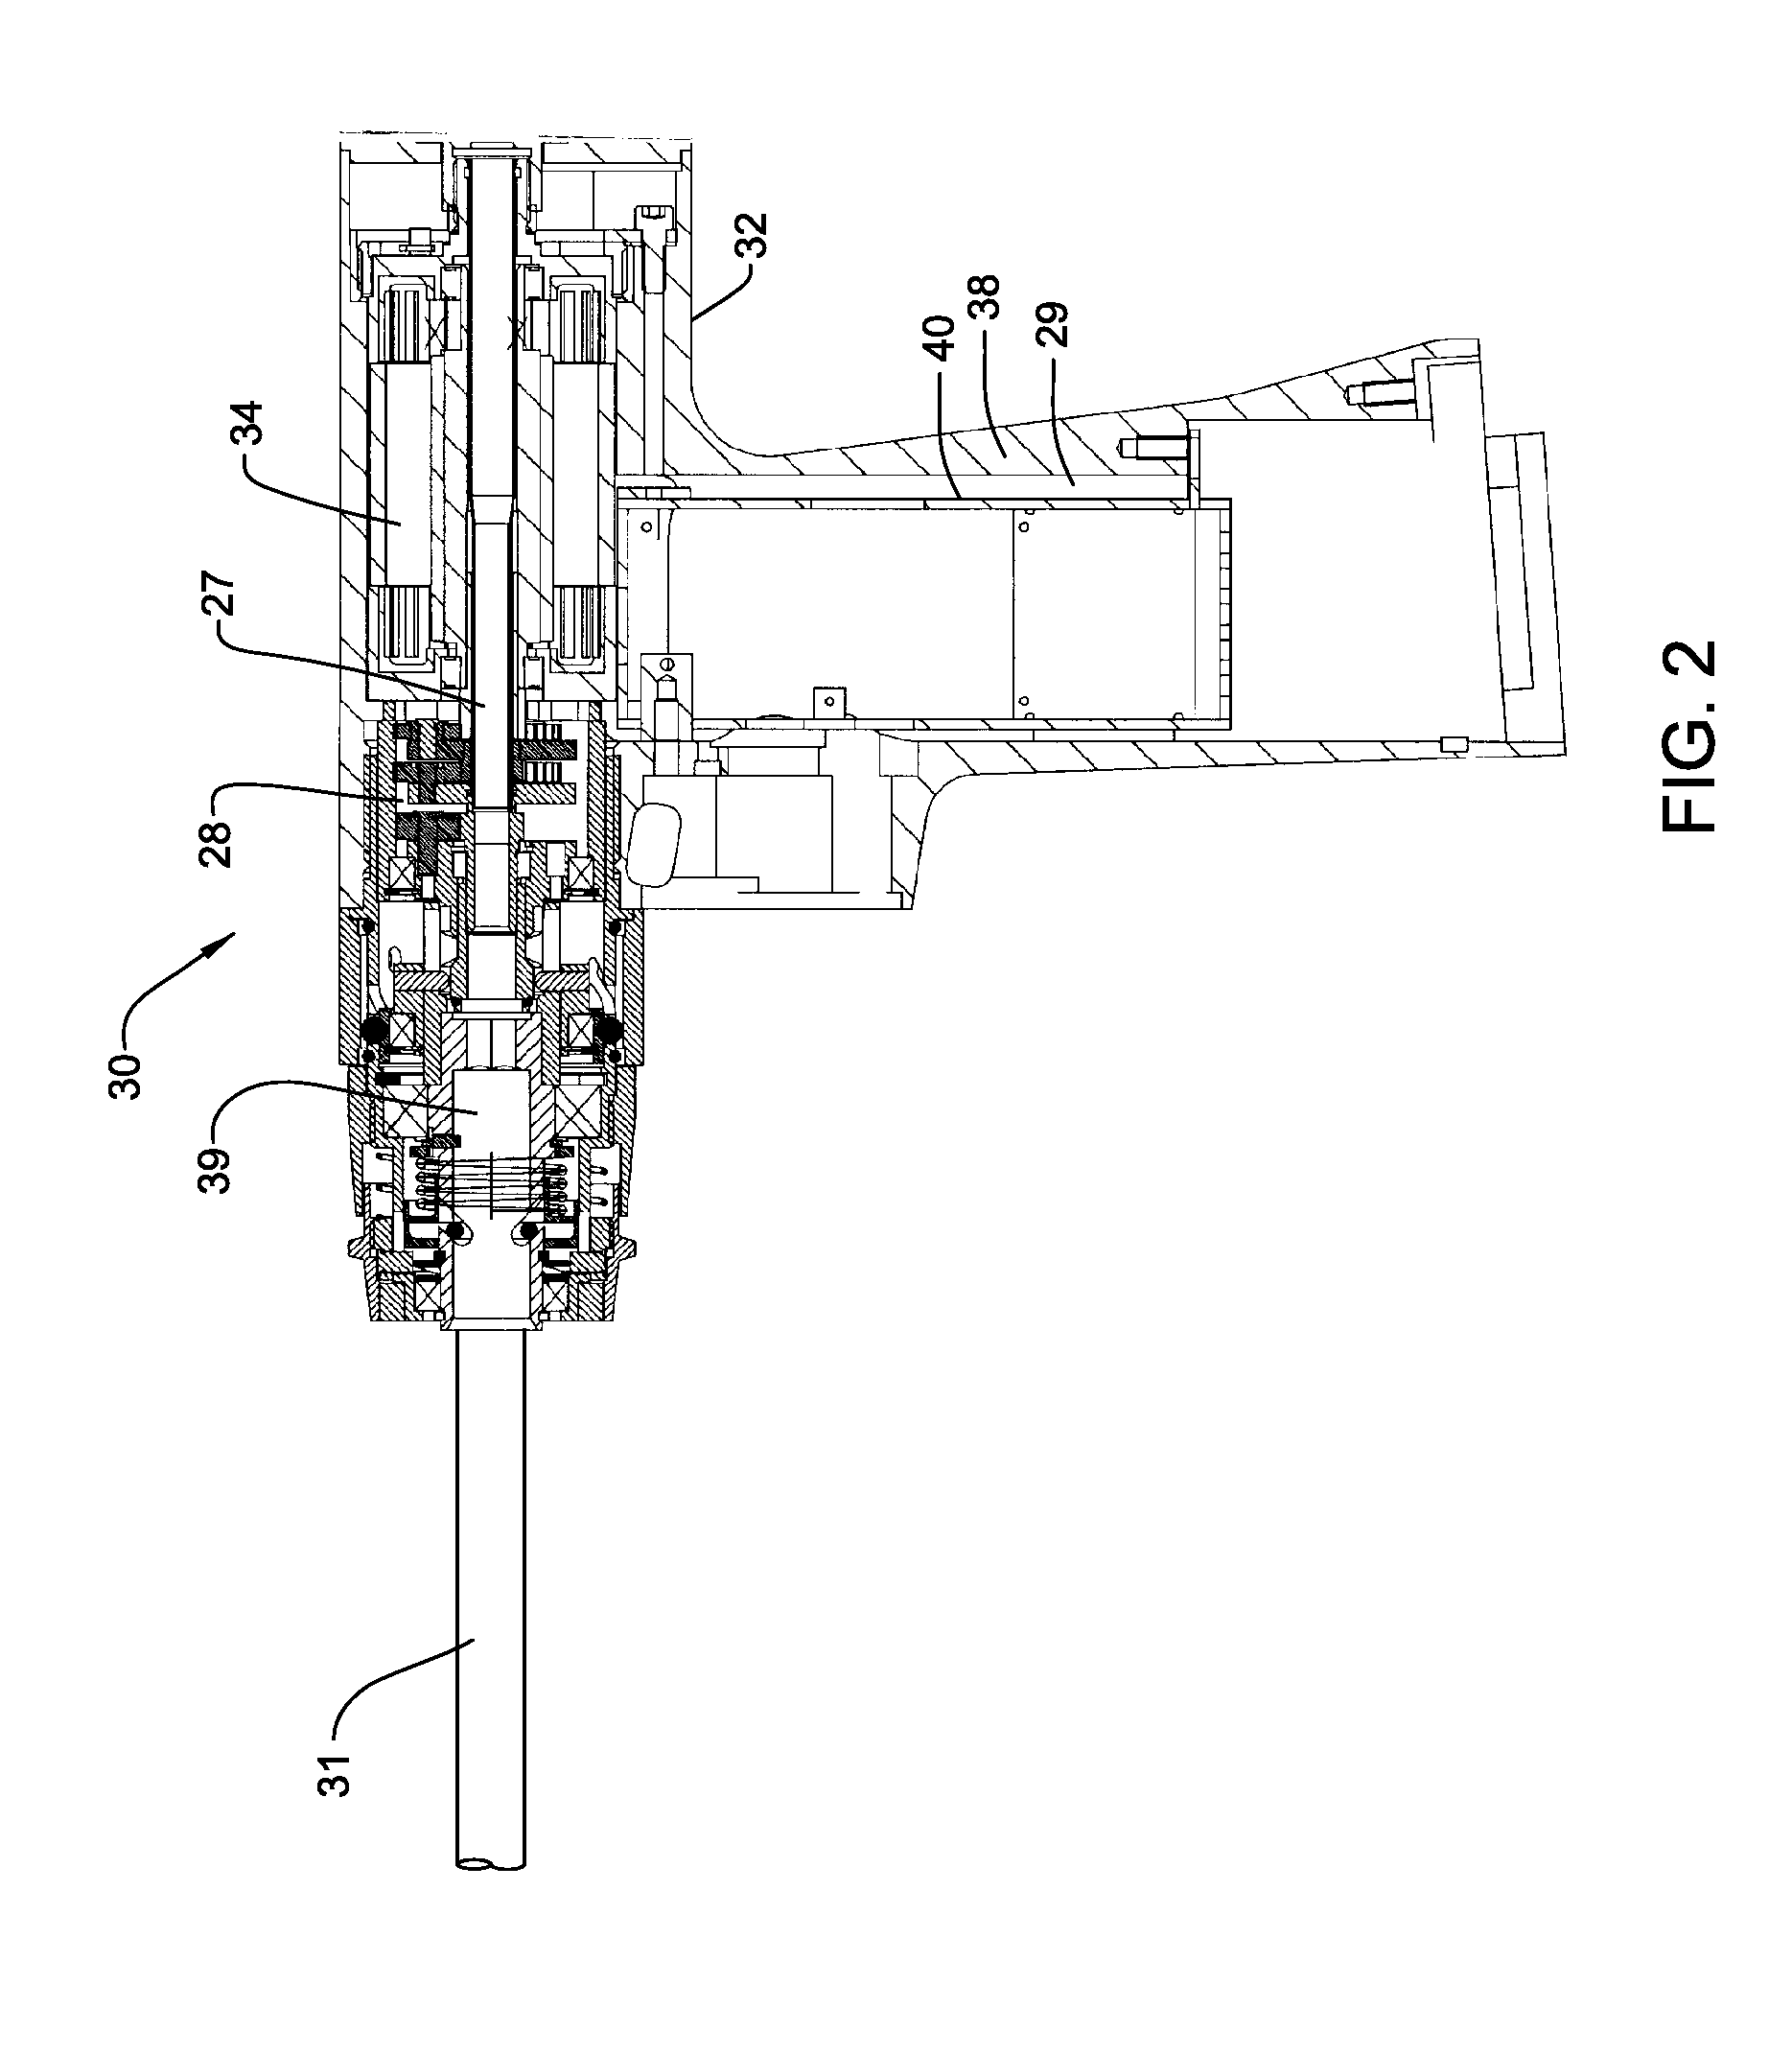 Powered surgical tool with a control module in a sealed housing, the housing having active seals for protecting internal components from the effects of sterilization